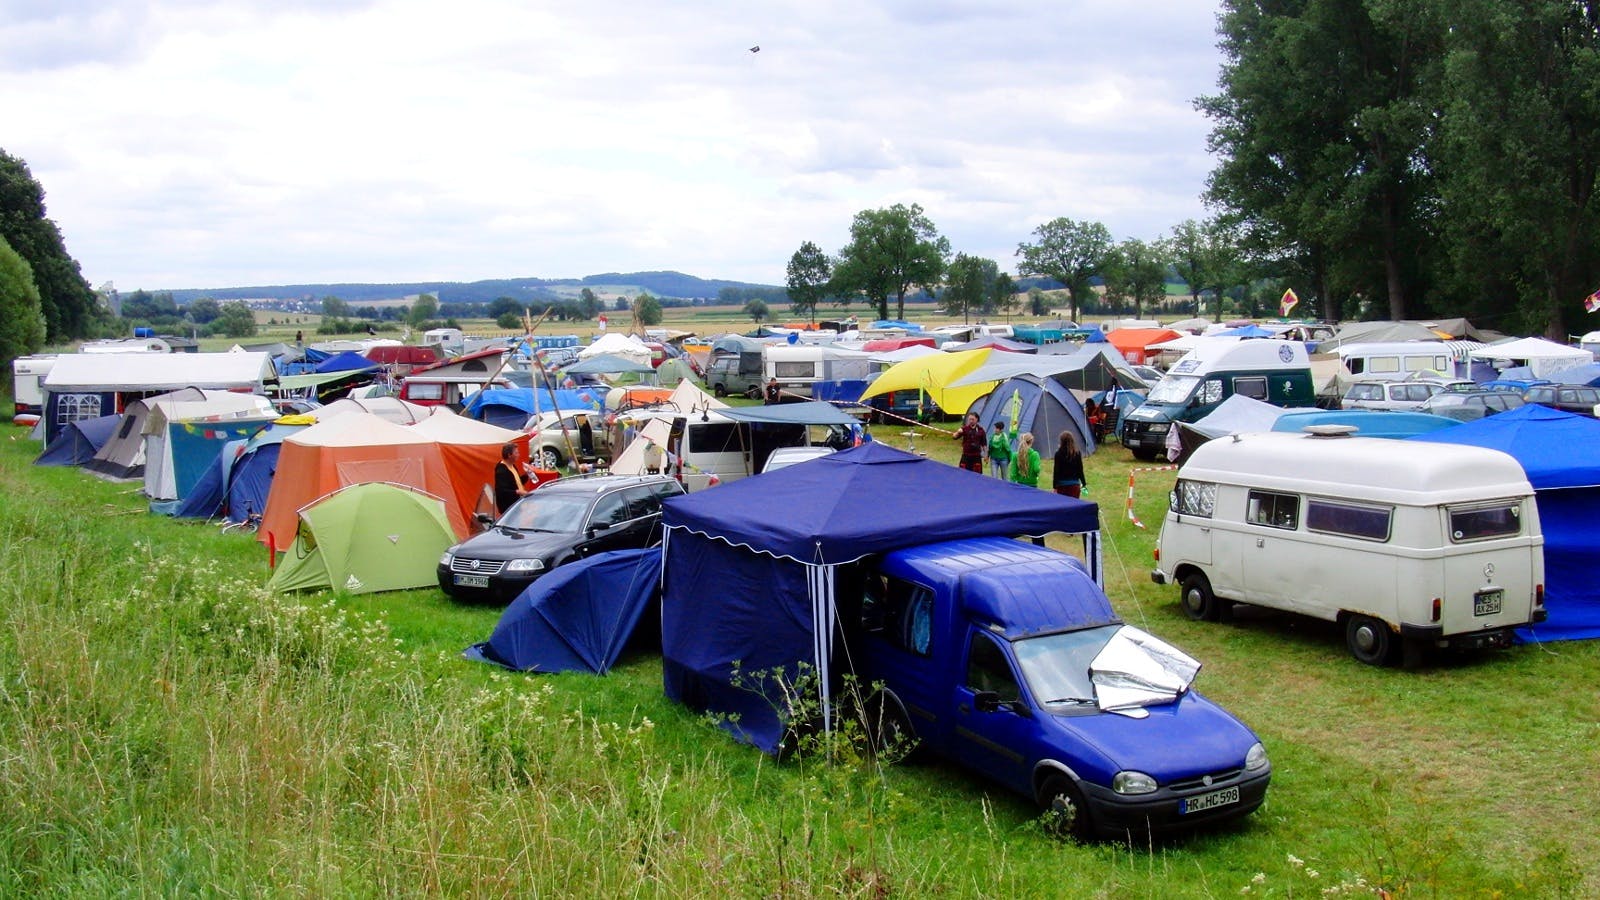 Cars and tents share the space in a festival camping ground. Pop-up canopies are used to create shade.